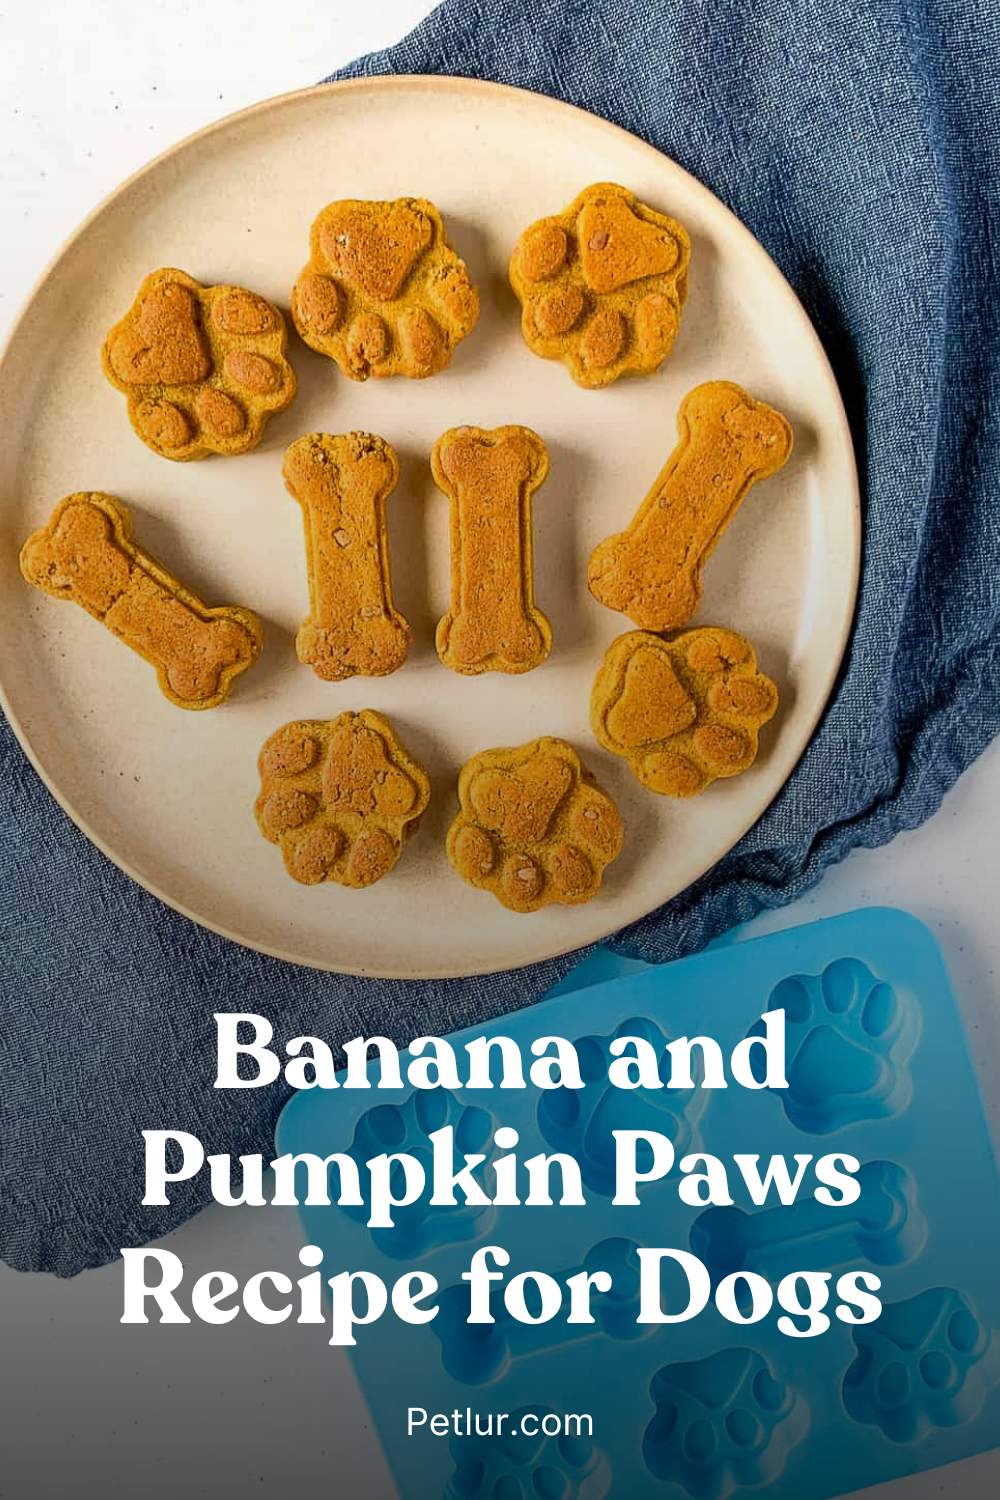 Banana and Pumpkin Paws Recipe for Dogs